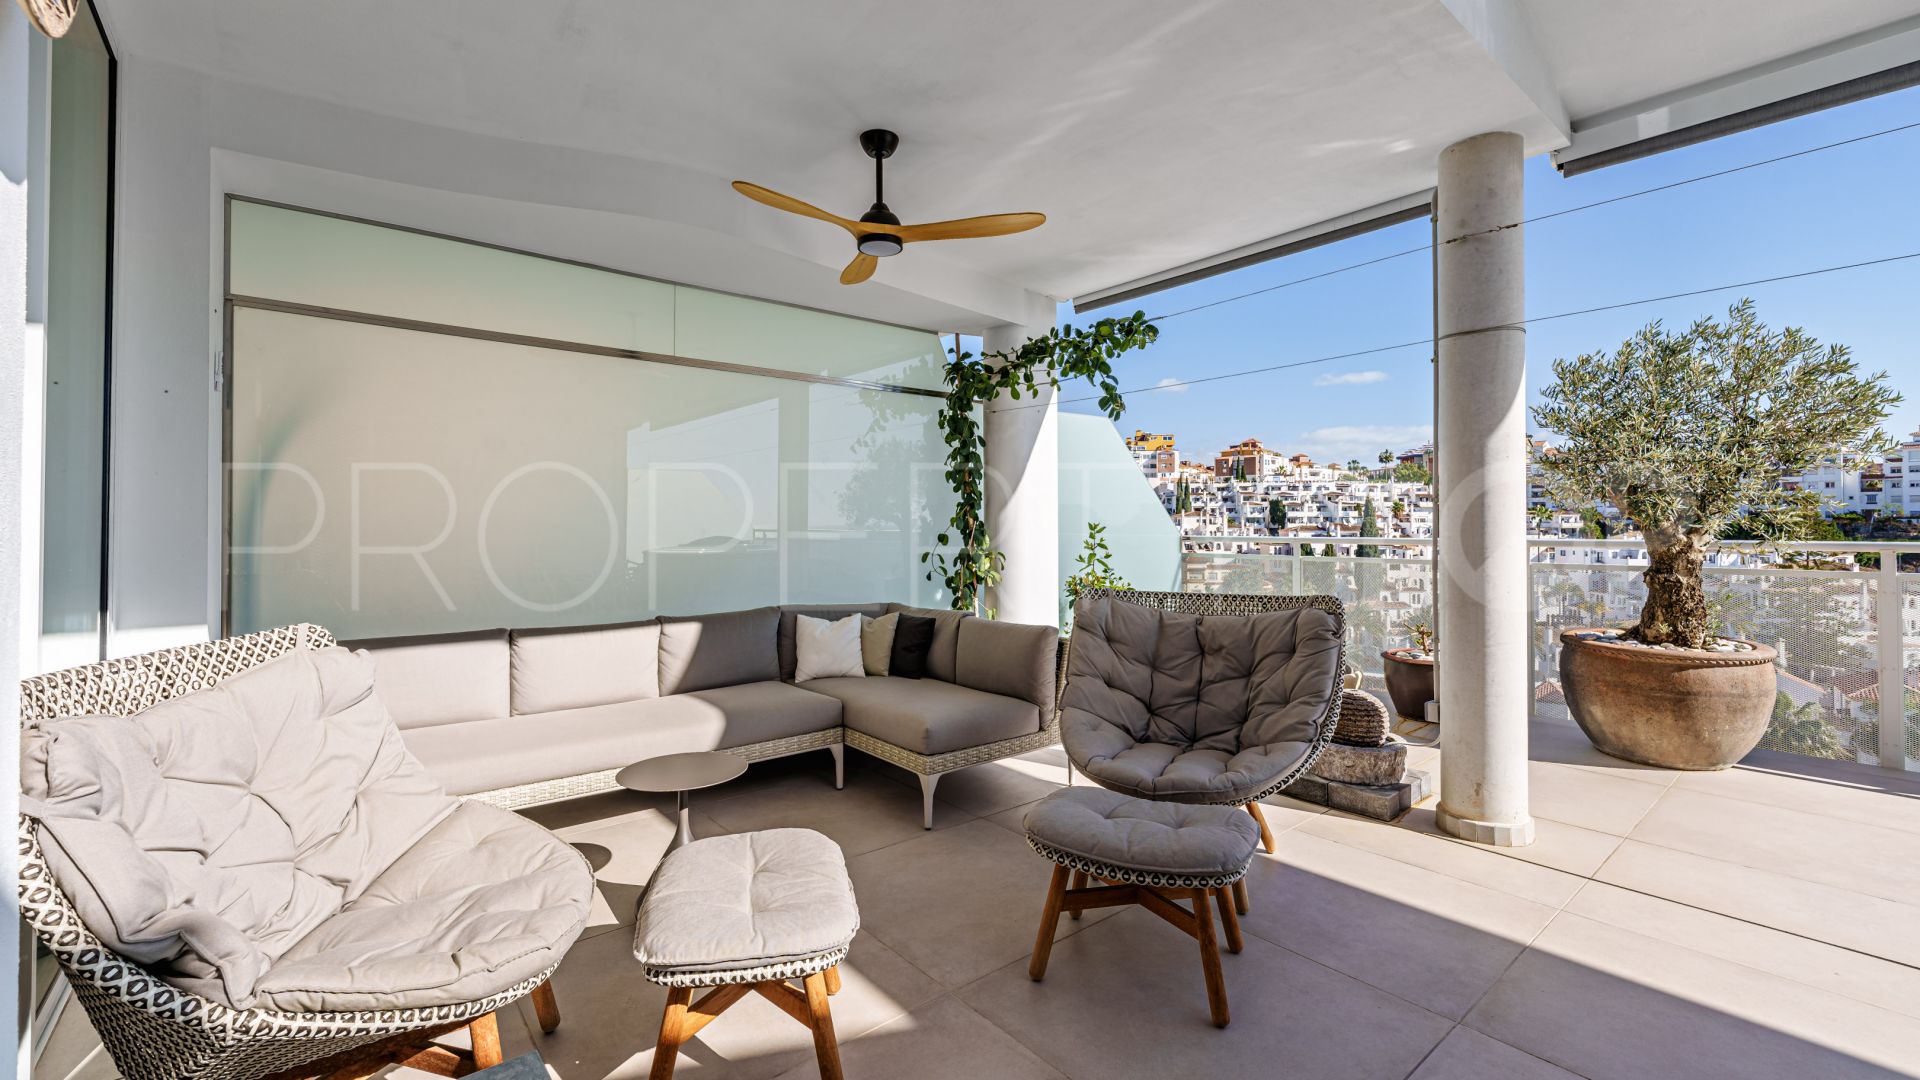 For sale Benalmadena duplex penthouse with 3 bedrooms